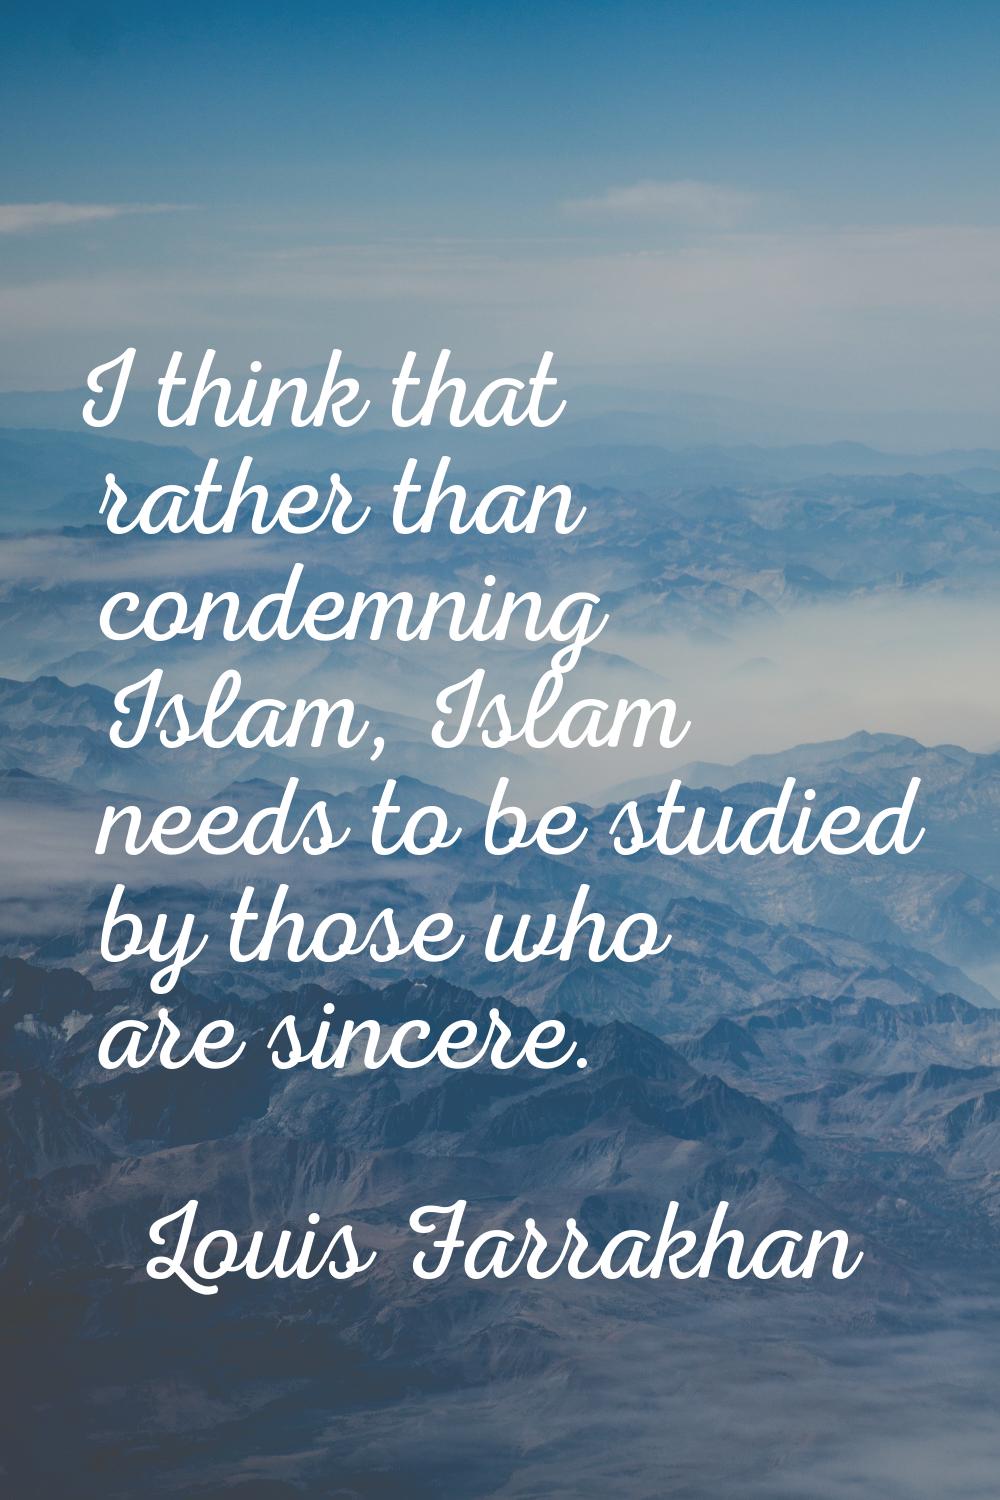 I think that rather than condemning Islam, Islam needs to be studied by those who are sincere.